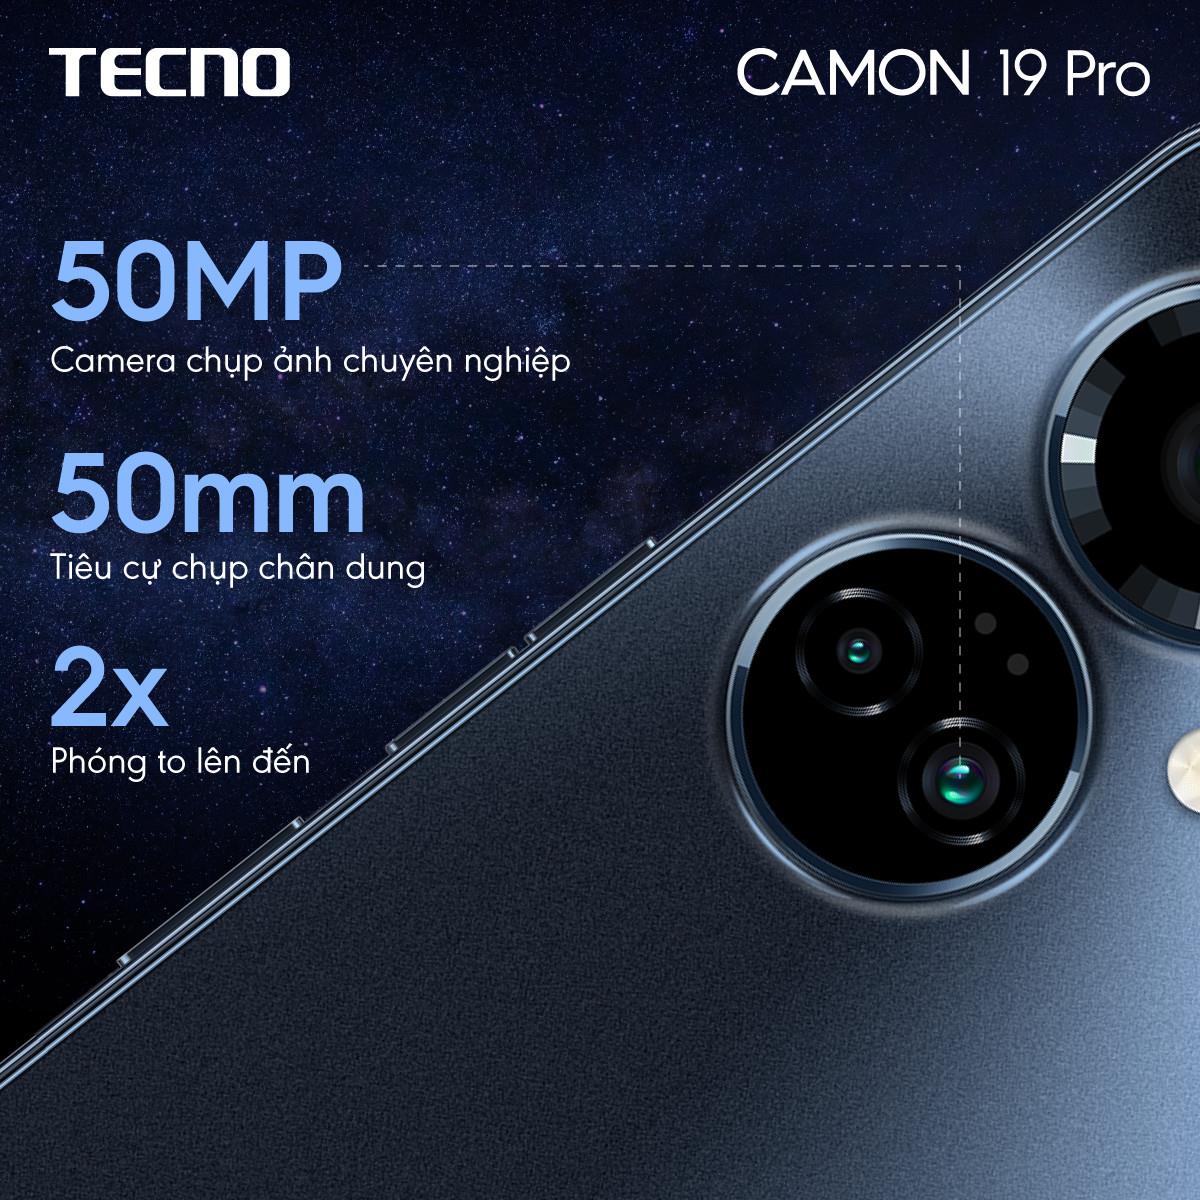 What's special about CAMON 19 Pro - the mid-range camera phone pioneered by TECNO in Vietnam?  - Photo 2.